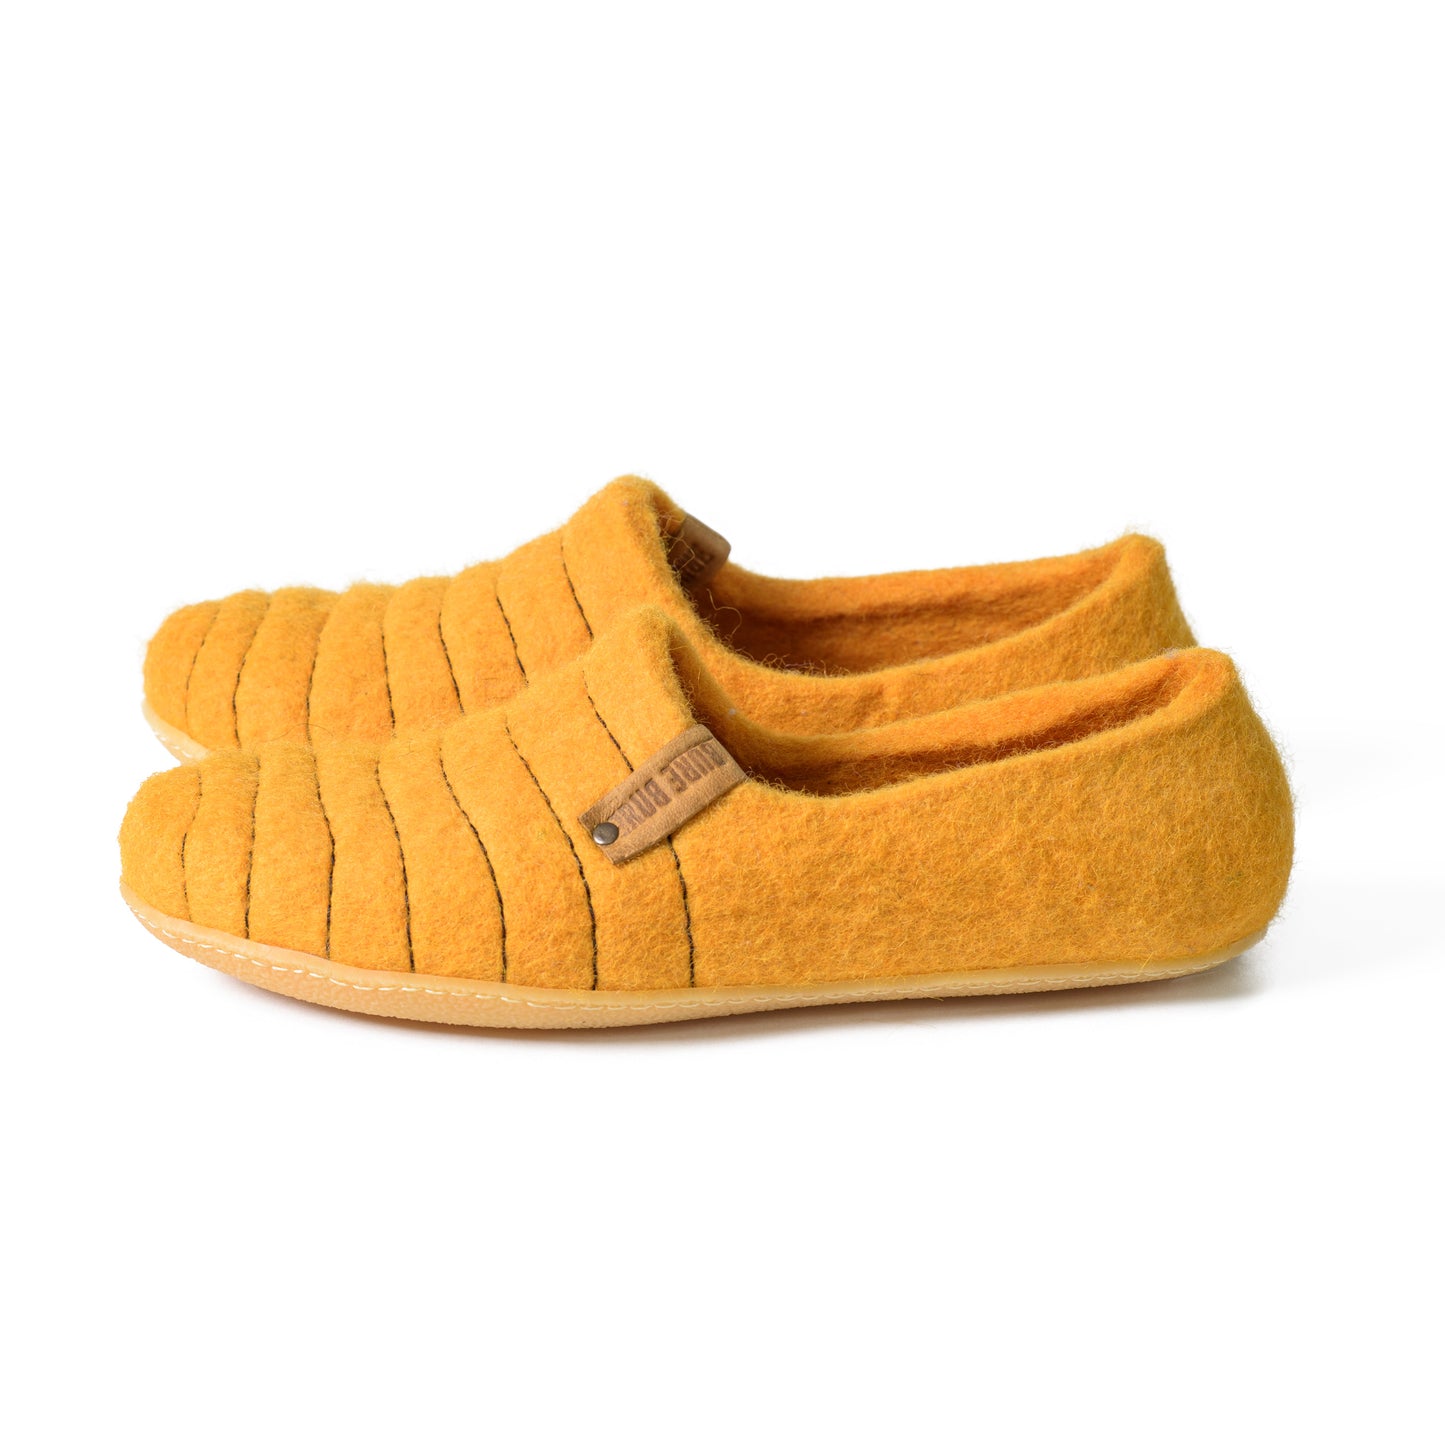 Sunflower Color Cocoon Felted Wool Clogs Style Slippers for Women